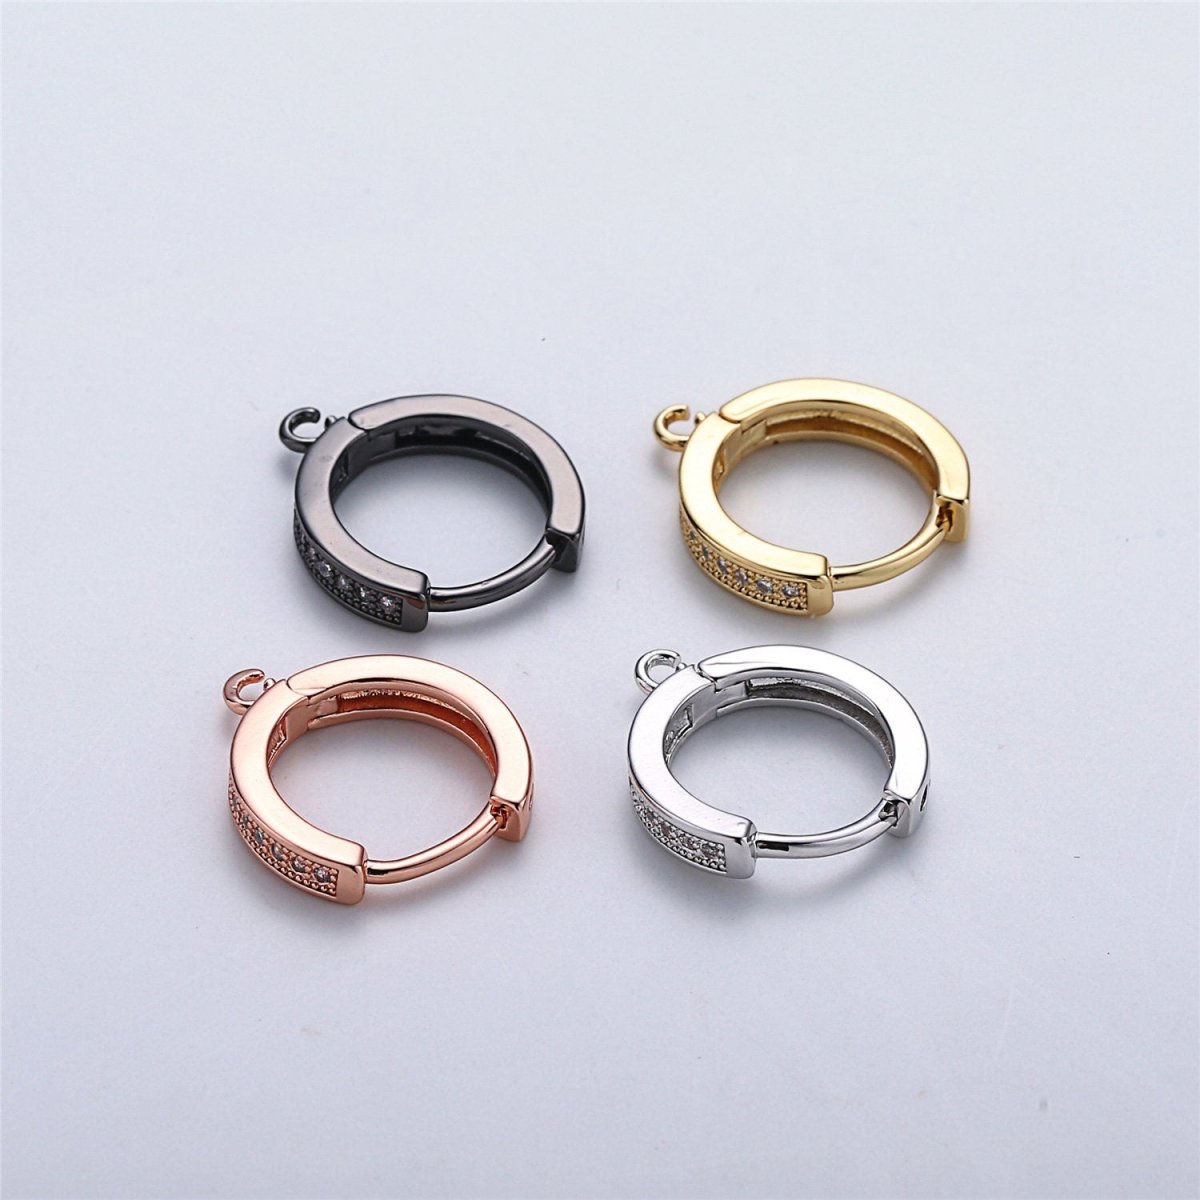 18k Gold Filled Earring One Touch Earring, jewelry Making, 15mm Gold huggie hoop earring with Micro Pave CZ Dainty Earring Charm K-161 K-162 L-331 L-332 - DLUXCA